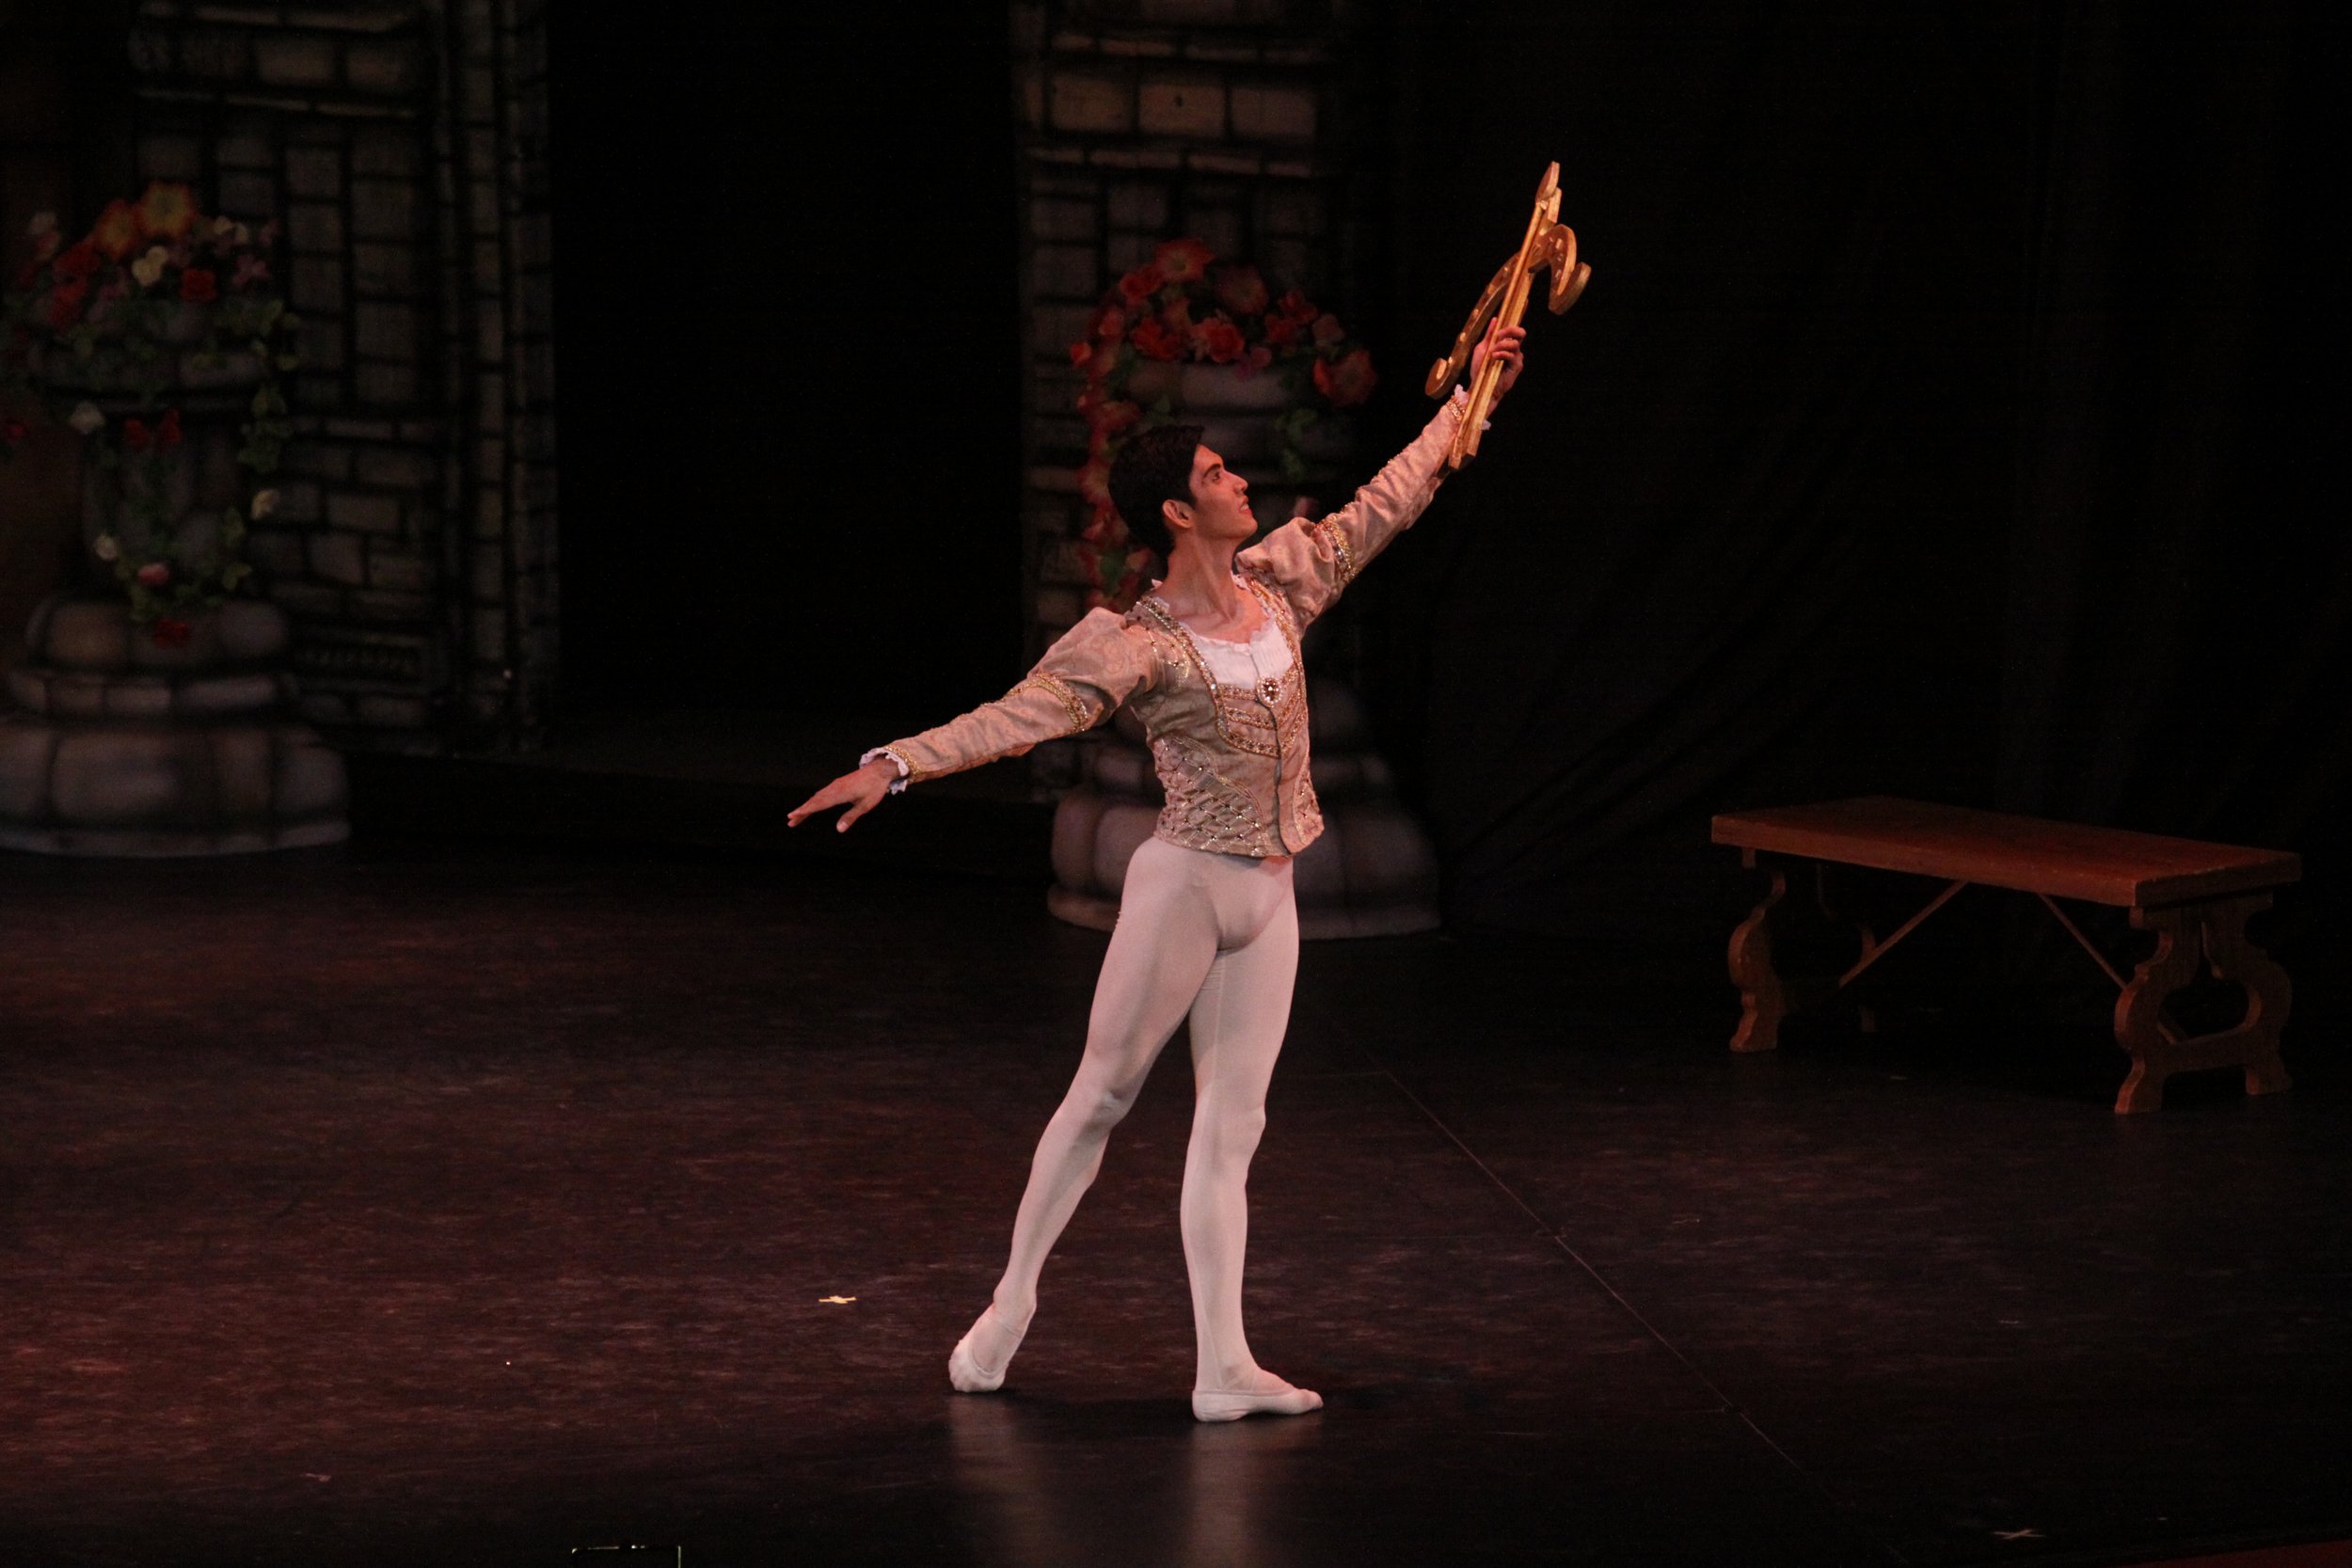    Nazer Salgado steps into the shoes of Prince Siegfried, one of the most sought-after roles for danseurs, in a 2011 production.    